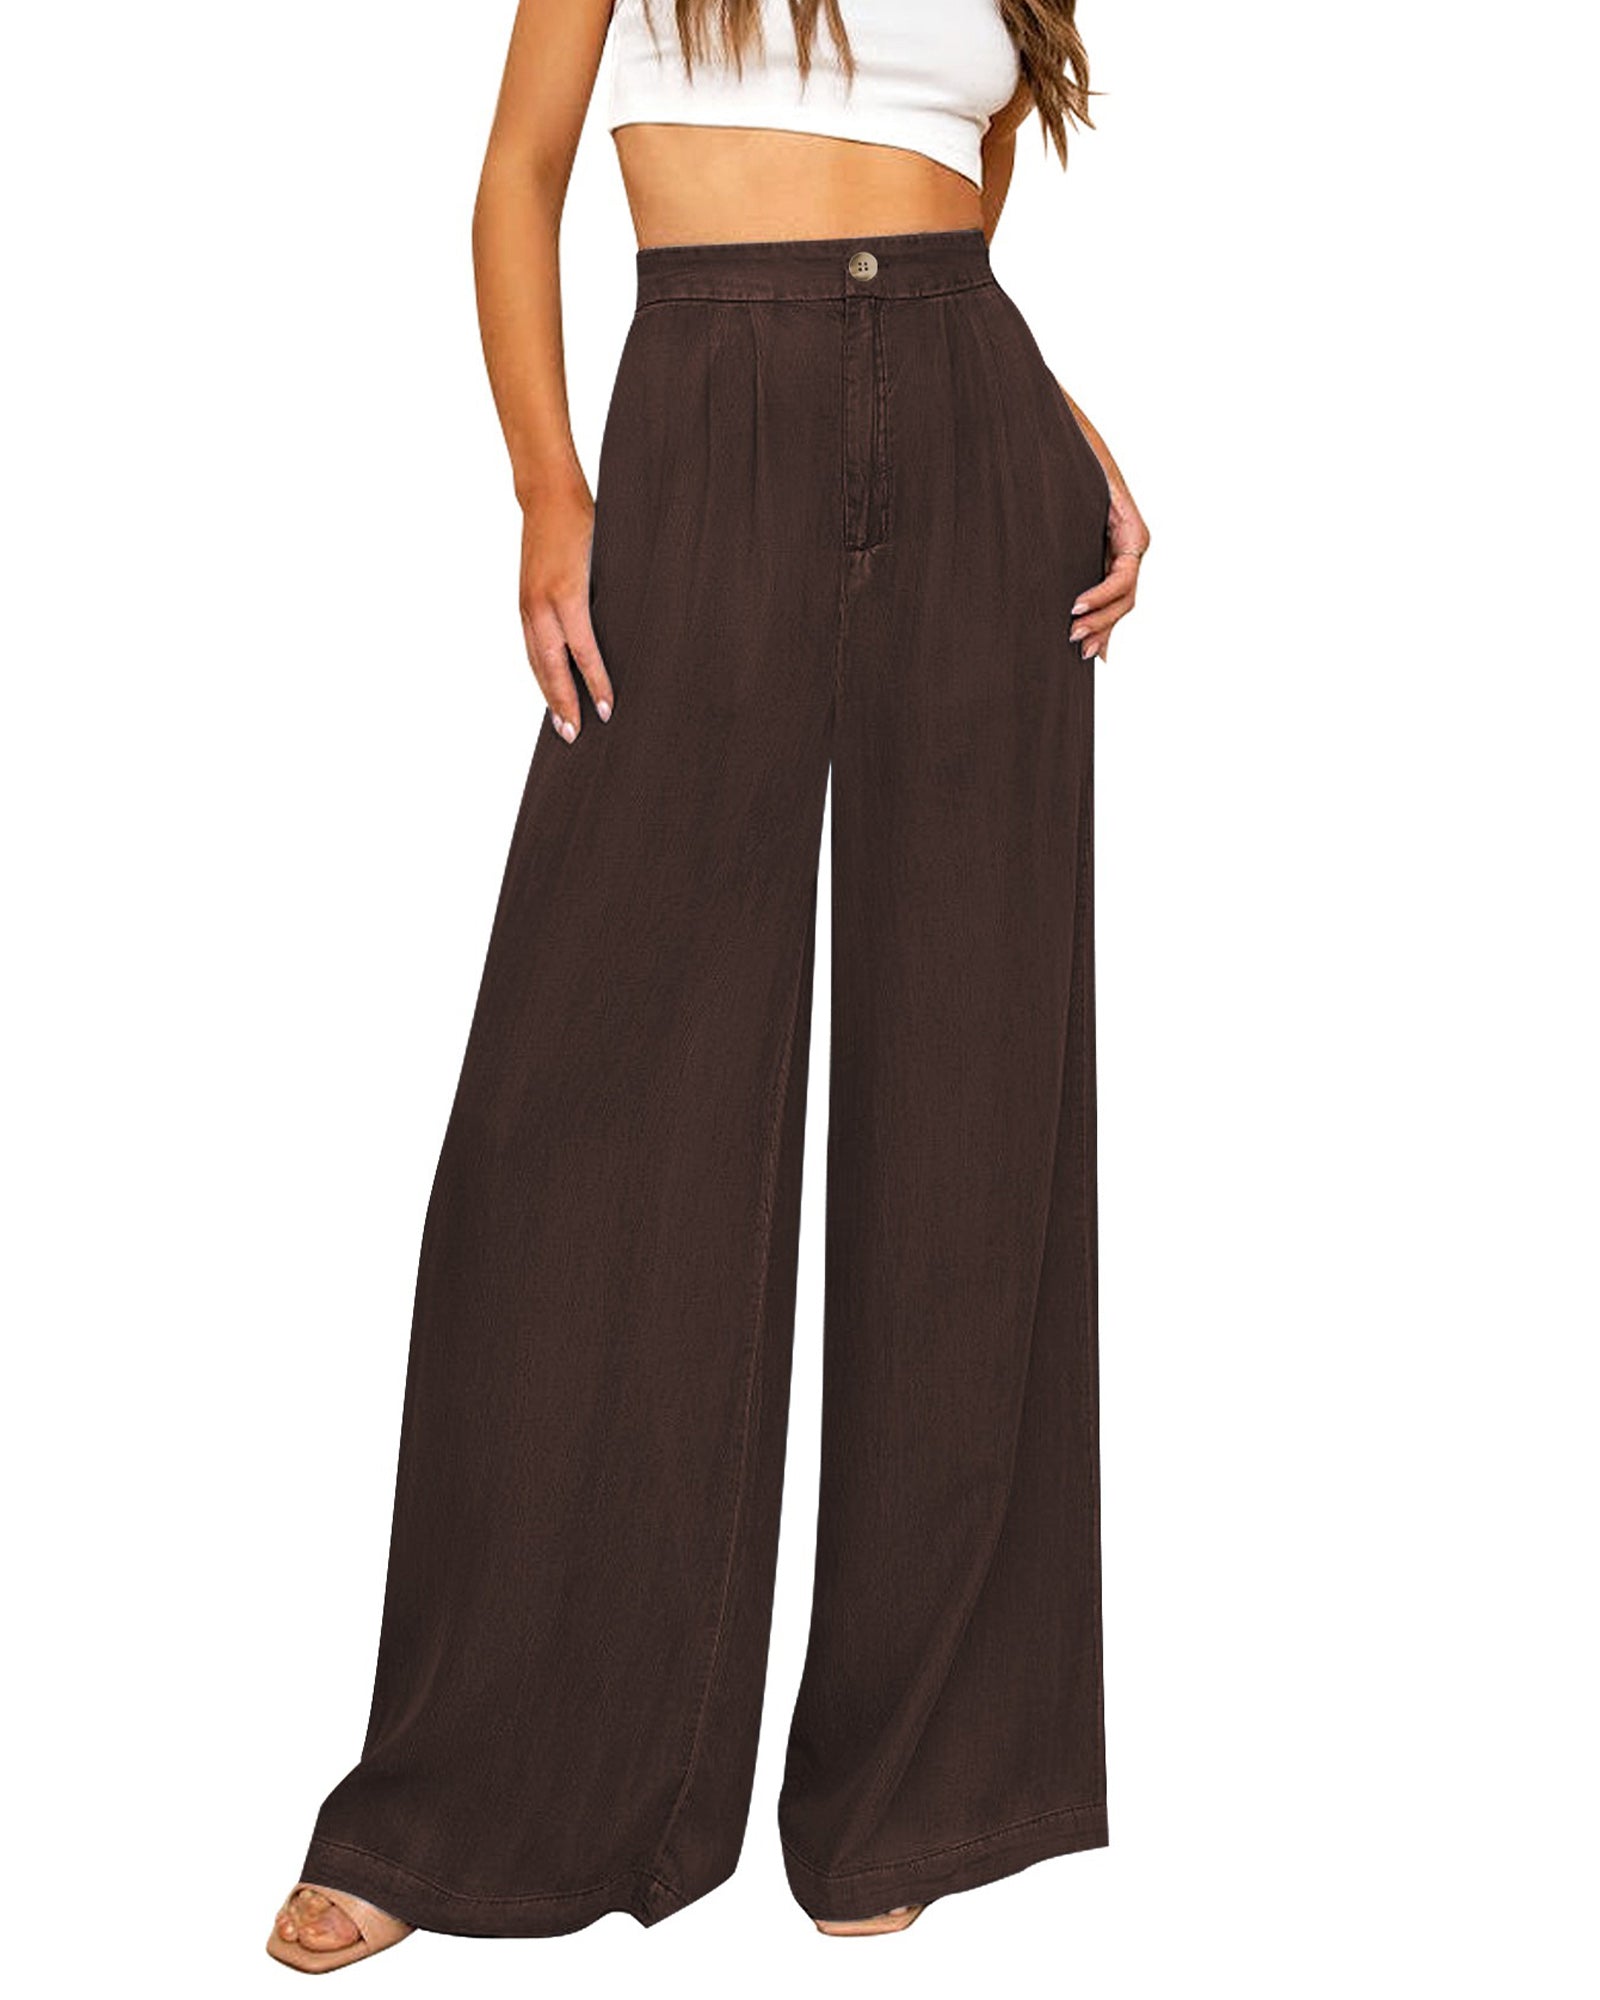 Wide Leg Pants for Women Summer Cotton Linen Loose Trousers Causal Plain High  Waist Beach Lounge Pants with Pocket (Color : Black, Size : XX-Large) price  in UAE | Amazon UAE | kanbkam